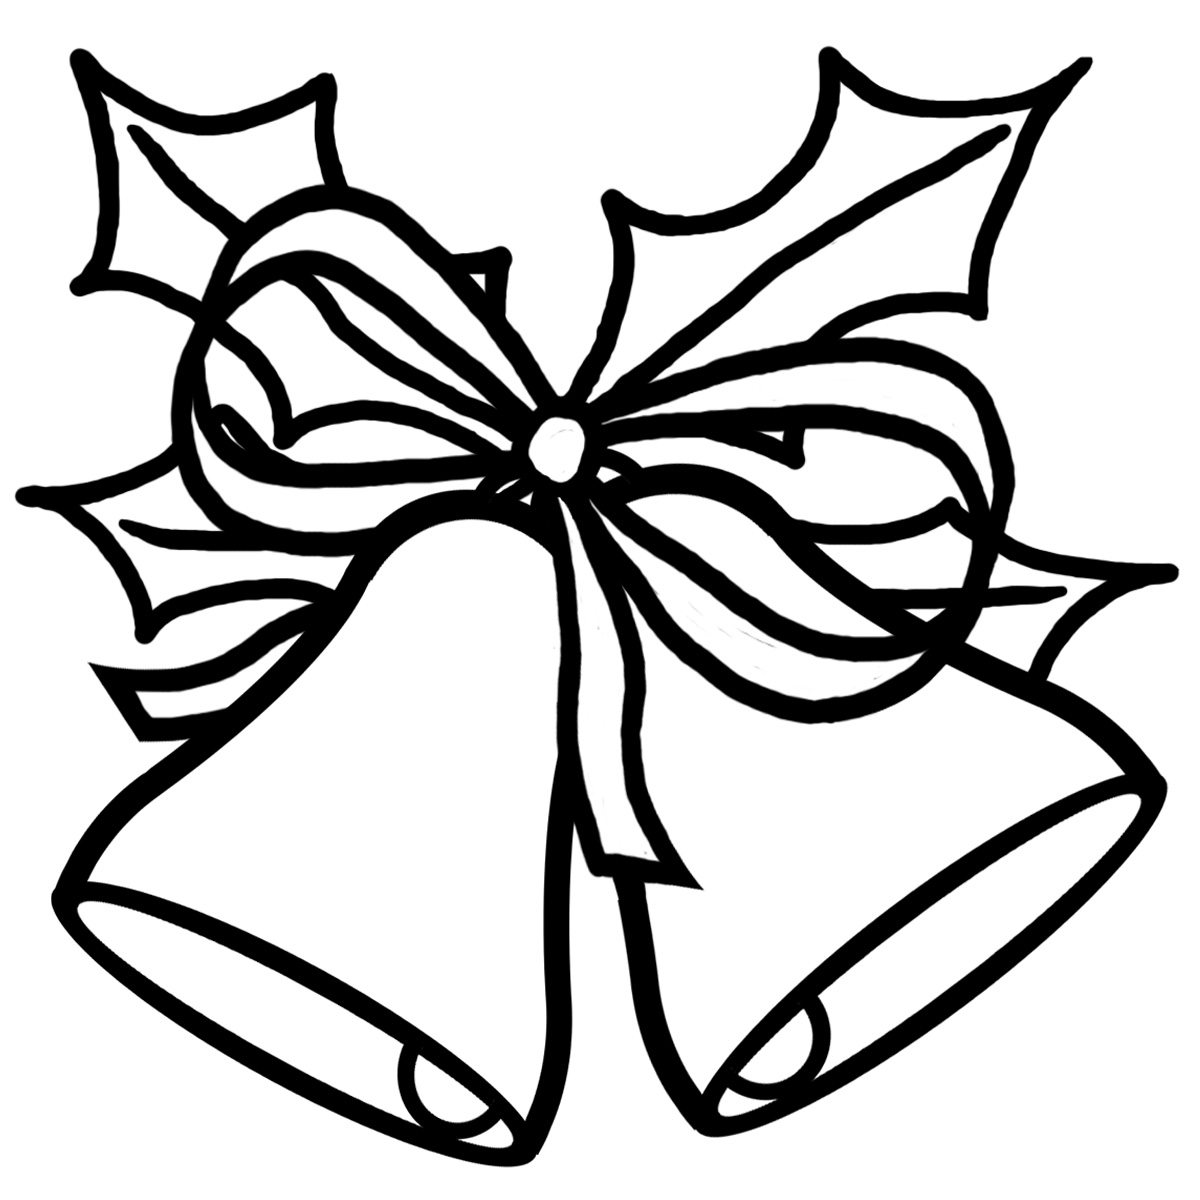 Christmas Clip Art Black And White | Funny Clip art and Holidays ...